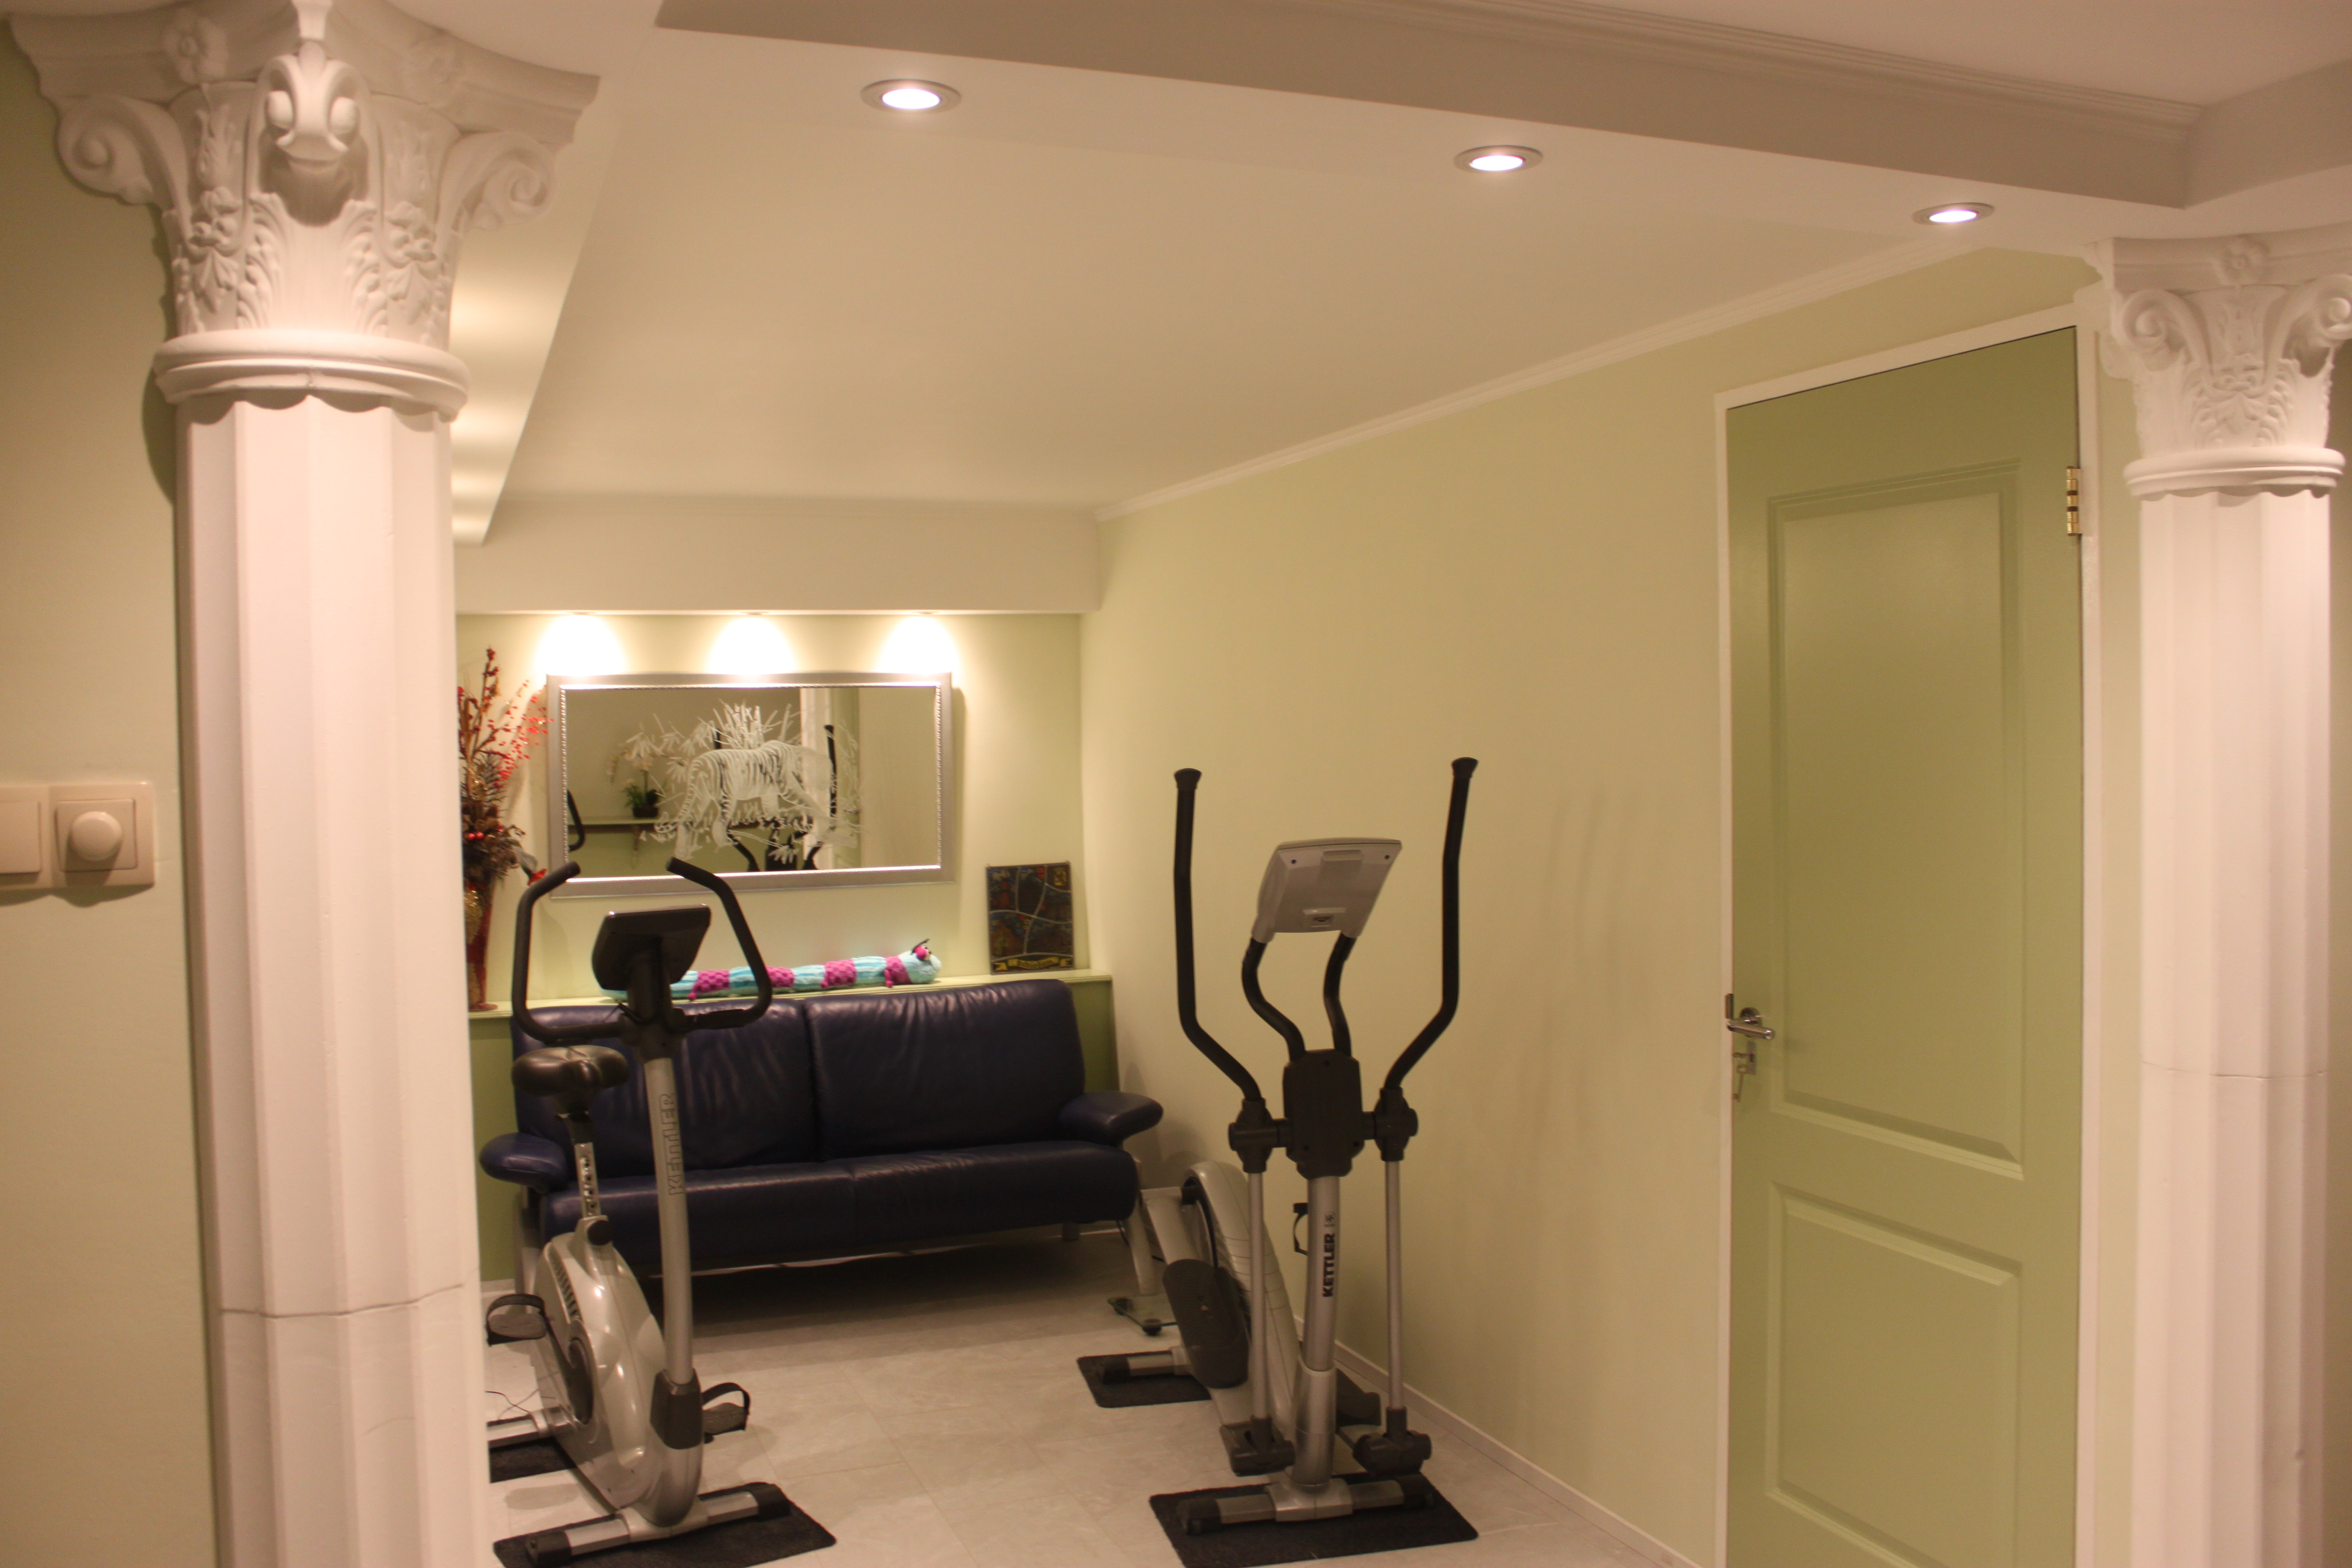 Our fitness room